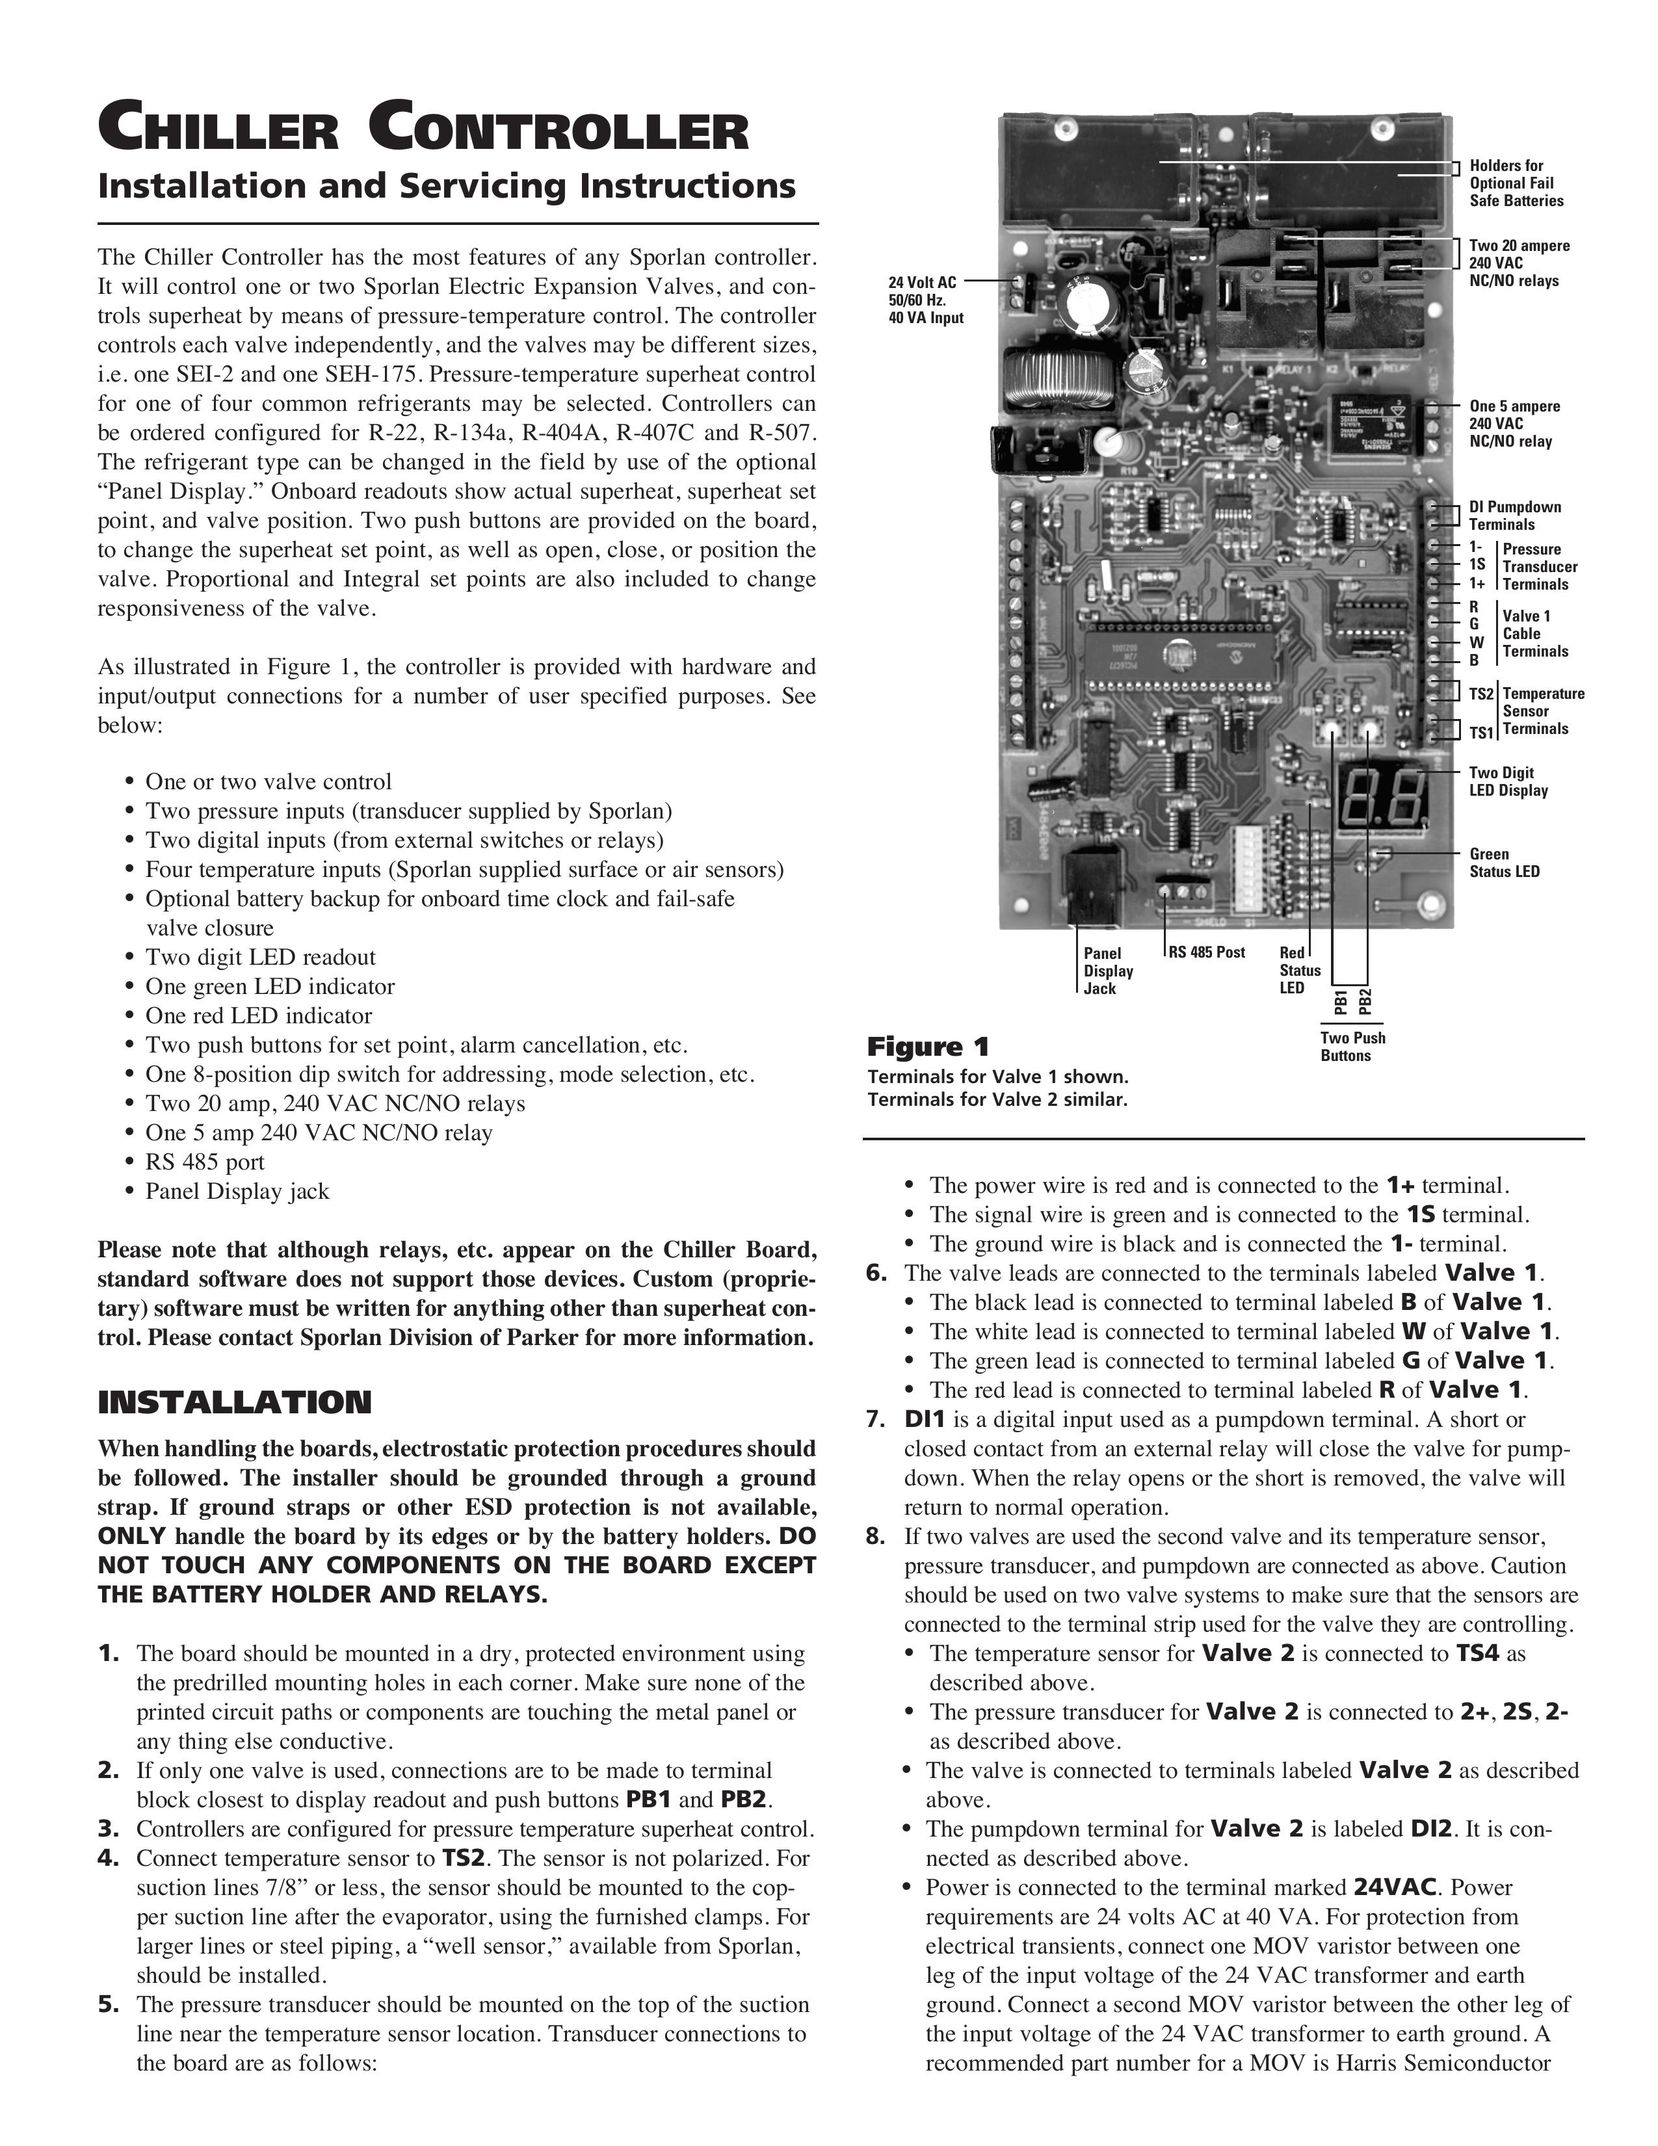 Parker Hannifin R-407C Network Card User Manual